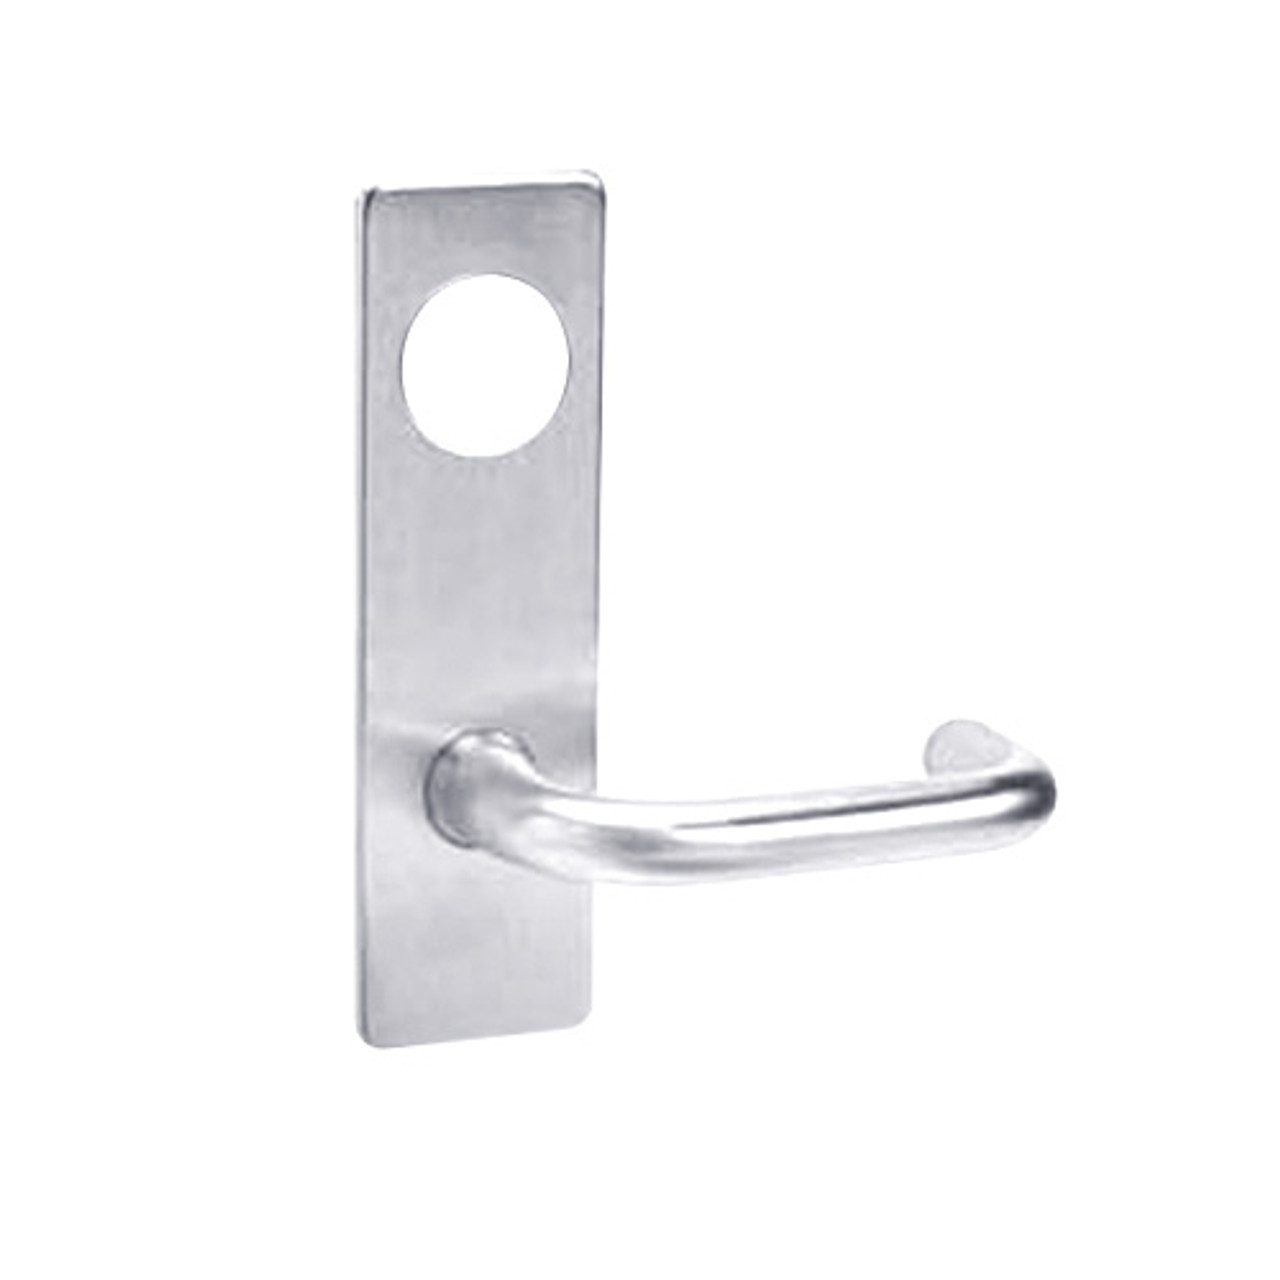 ML2065-LSM-625-M31 Corbin Russwin ML2000 Series Mortise Dormitory Trim Pack with Lustra Lever in Bright Chrome